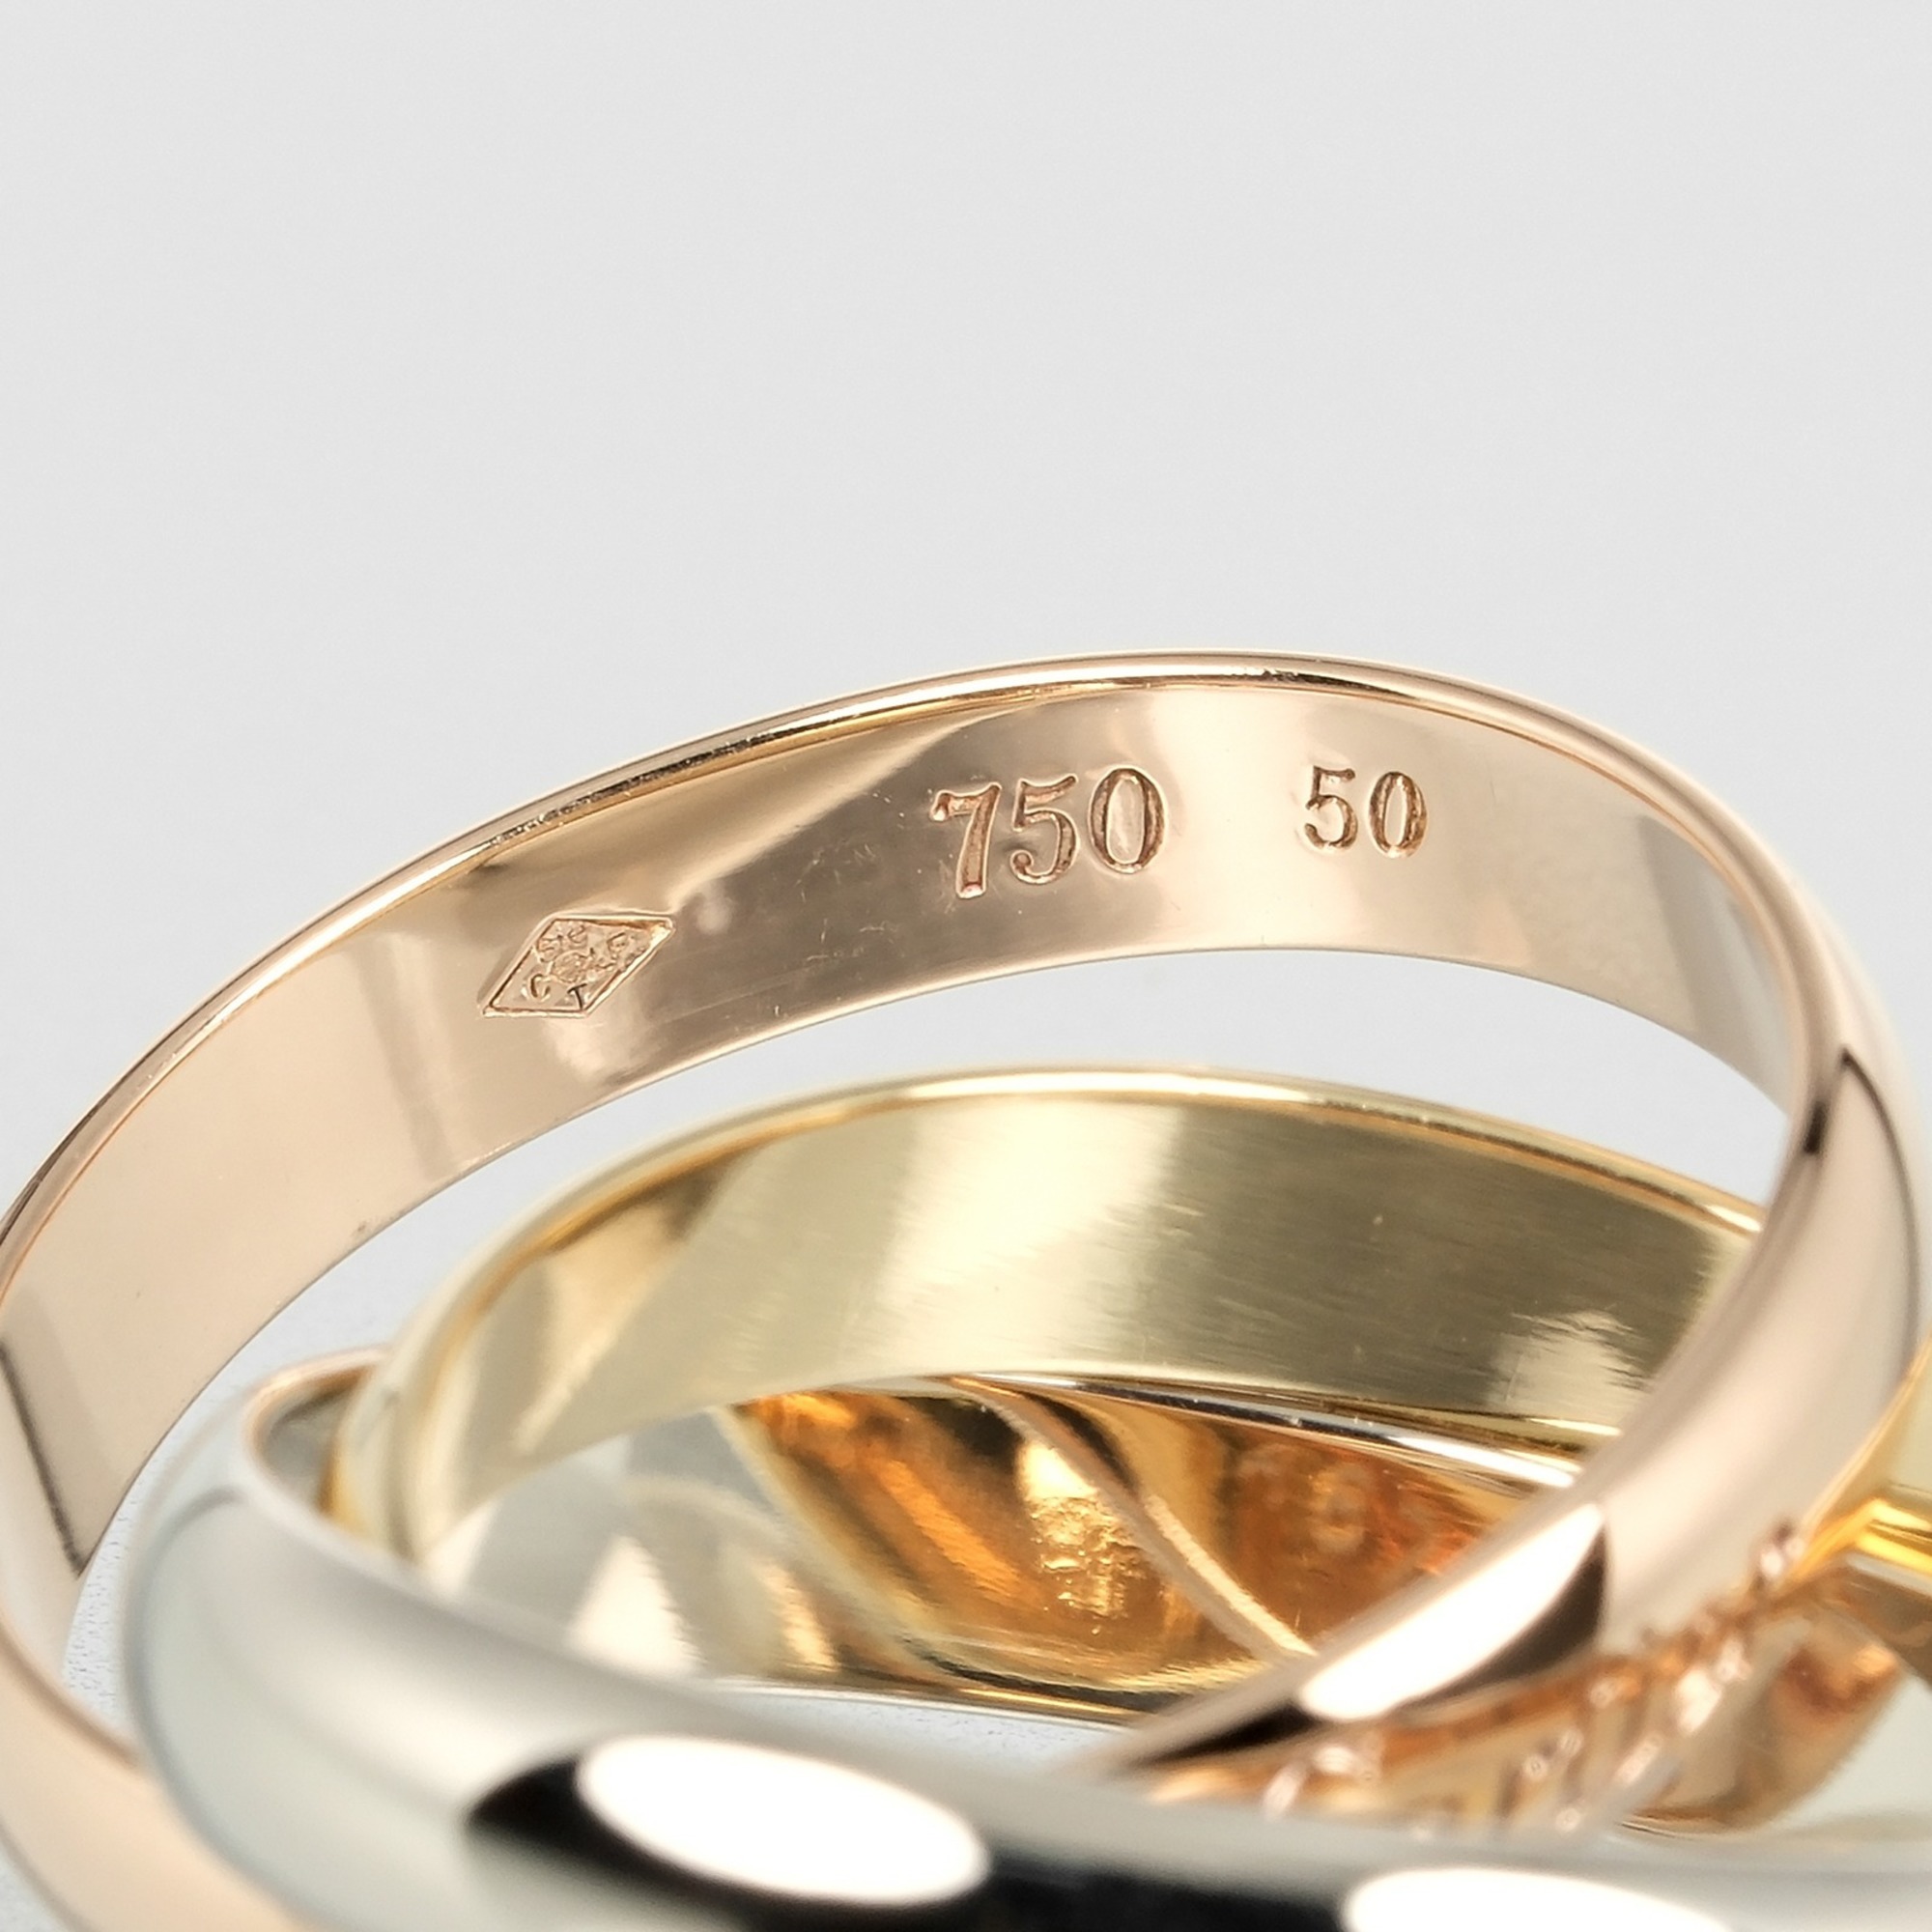 Cartier Trinity size 9.5 ring, K18 gold, YG, PG, WG, approx. 7.33g